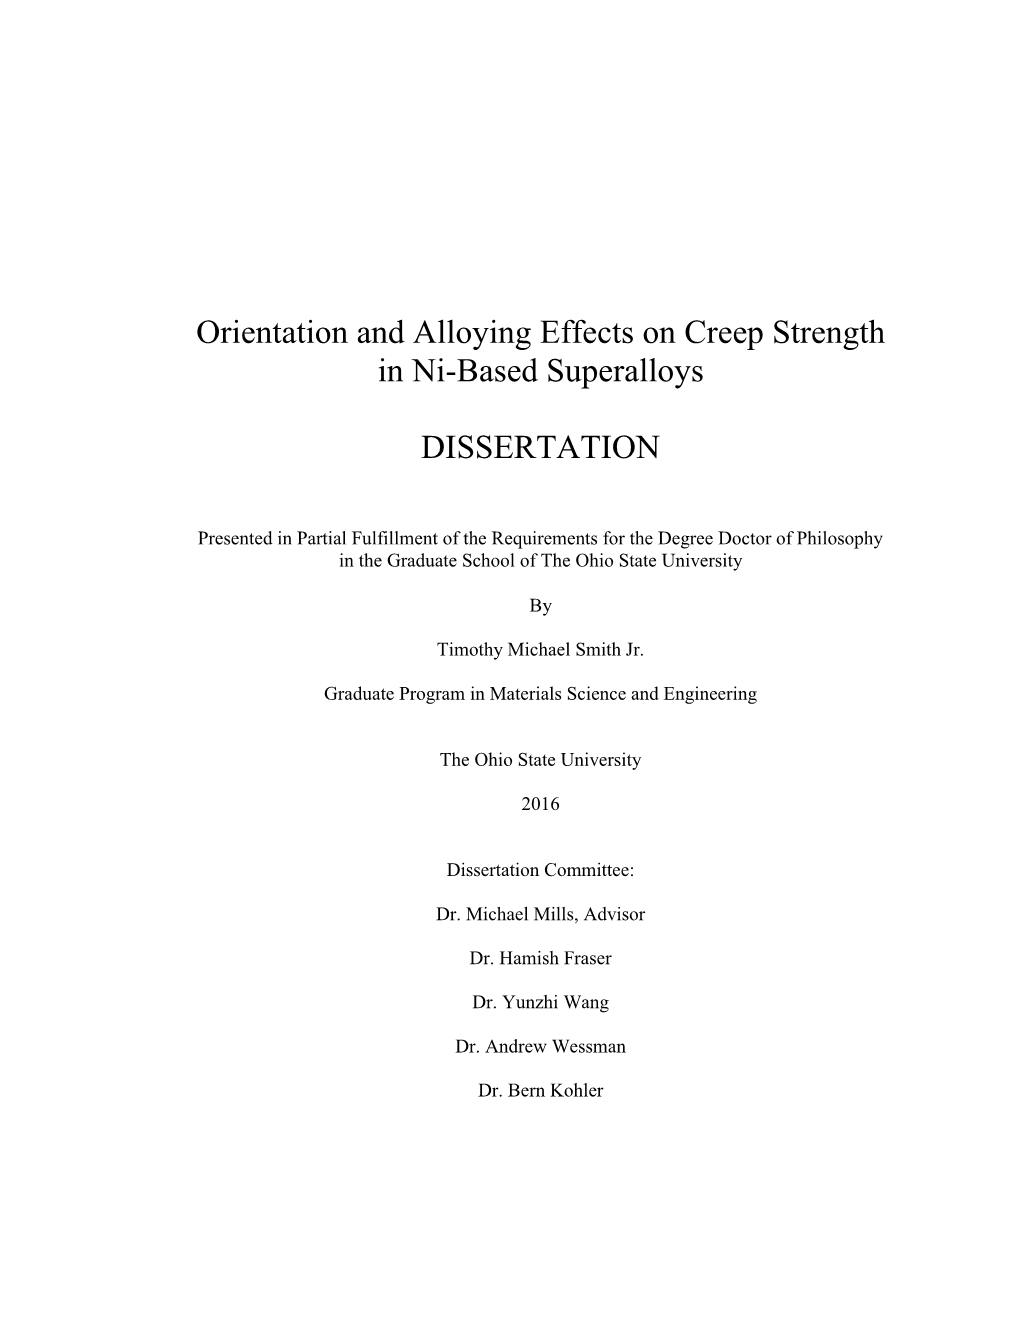 Orientation and Alloying Effects on Creep Strength in Ni-Based Superalloys